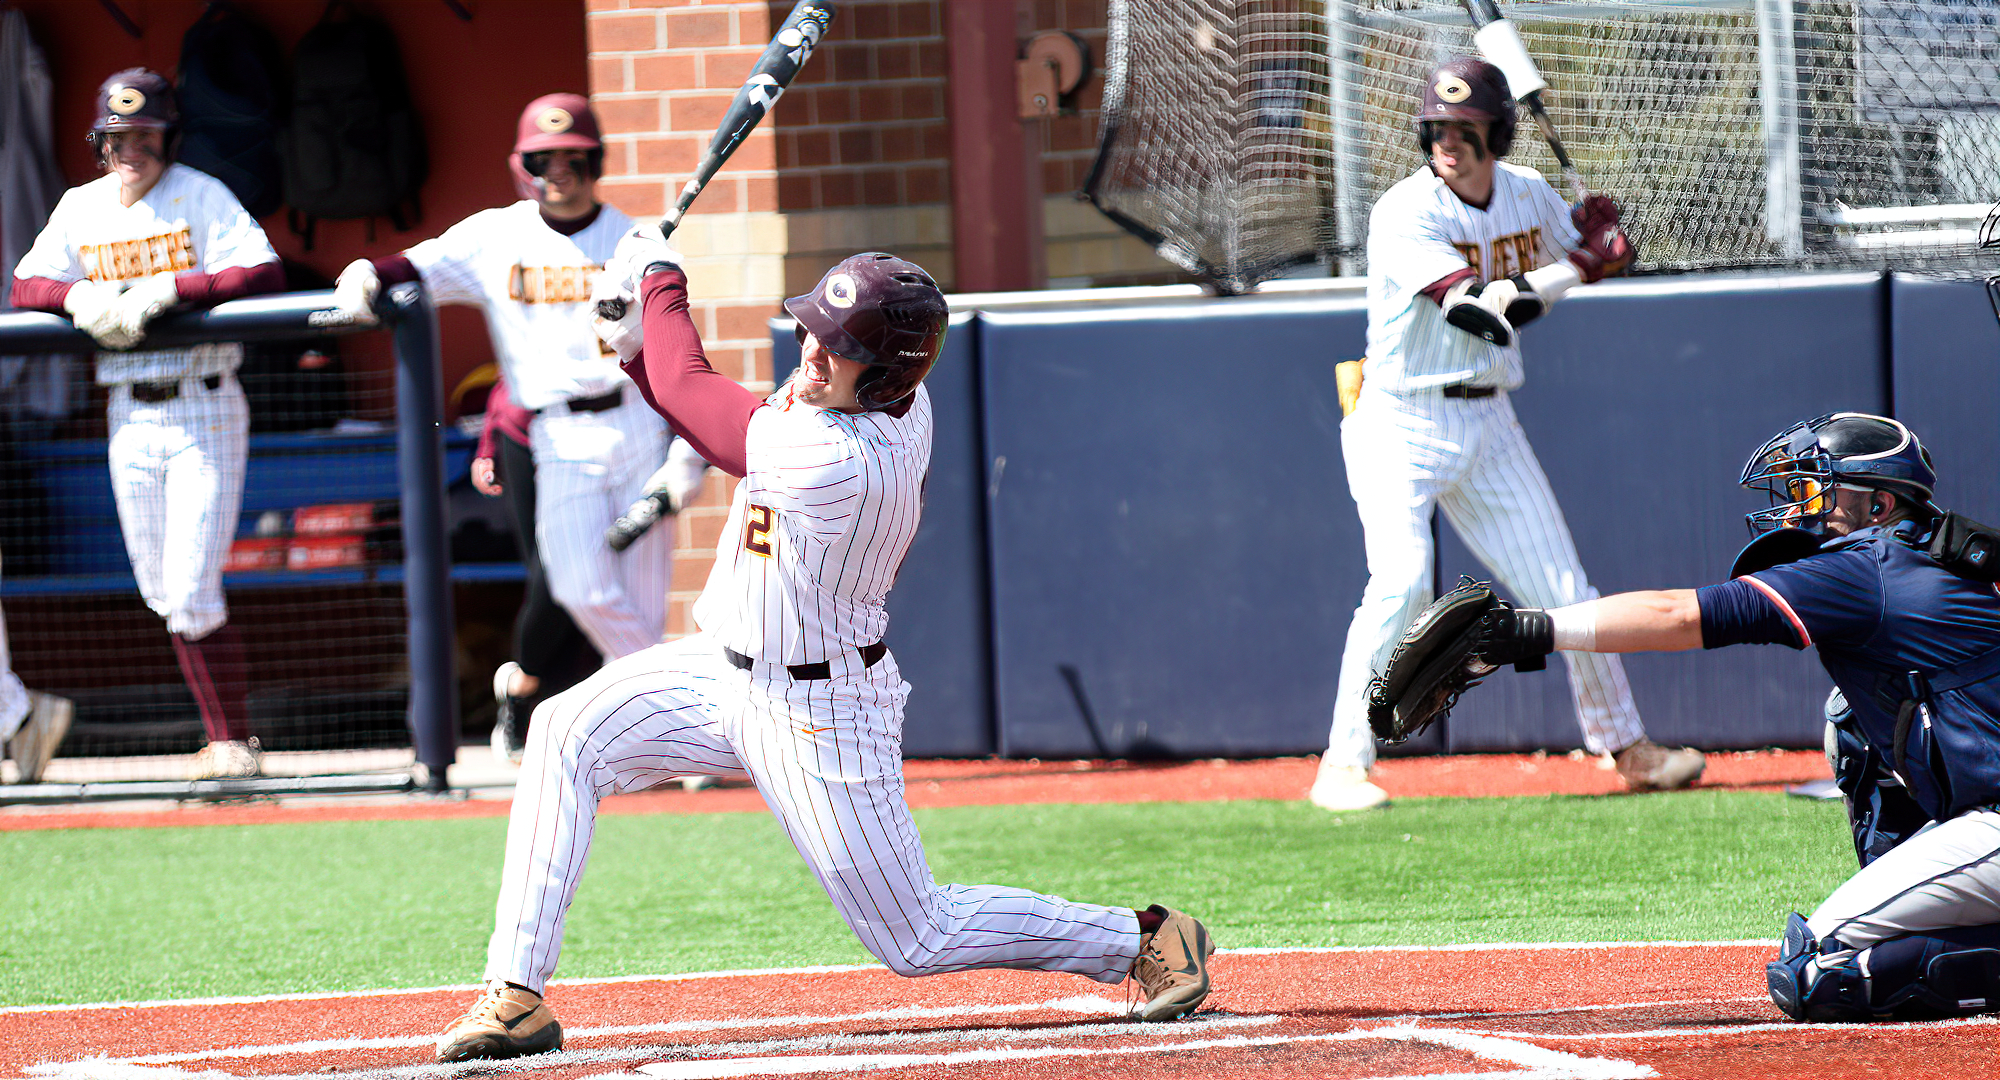 Matt Gruber connects on the first of his two home runs in the Cobbers' sweep over Macalester. He was 5-for-7 and posted 8 RBI on the day.